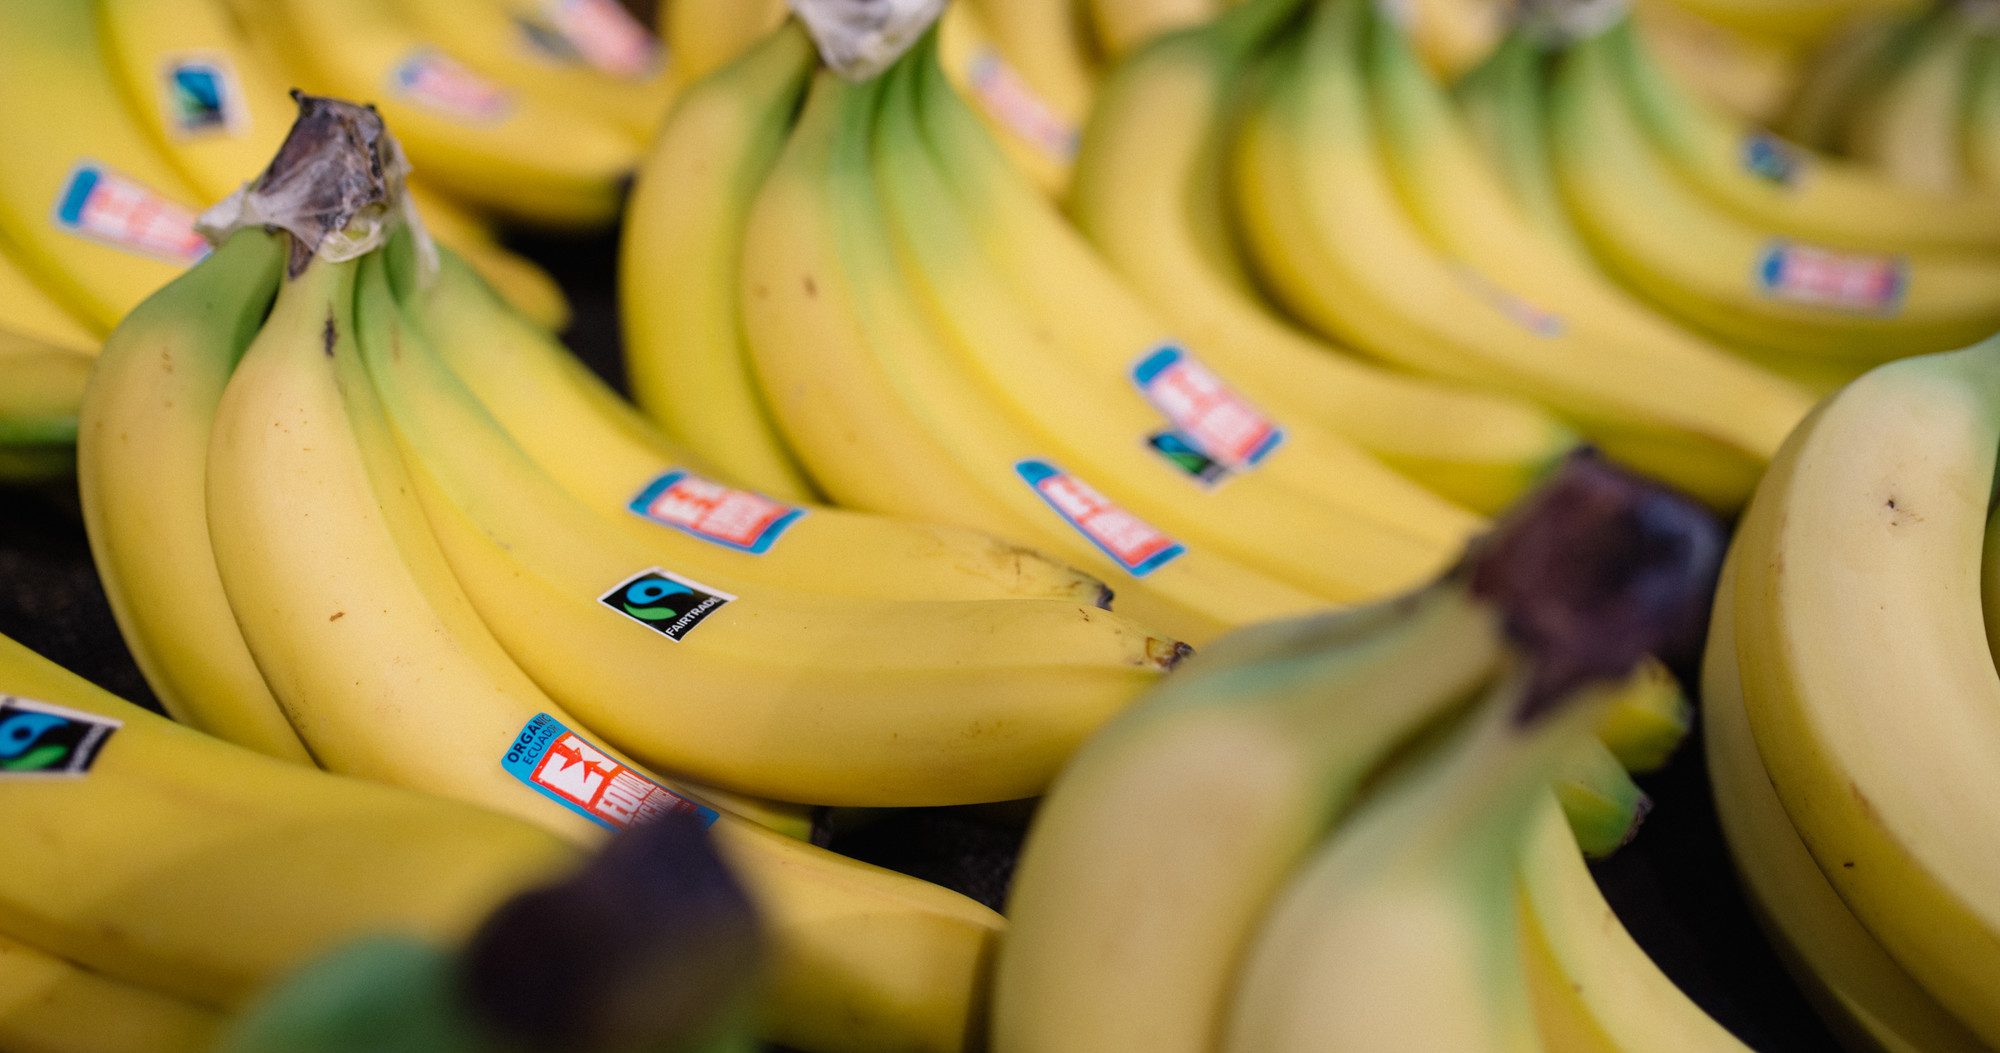 Yellow Fairtrade certified bananas sit in a beautiful produce display.